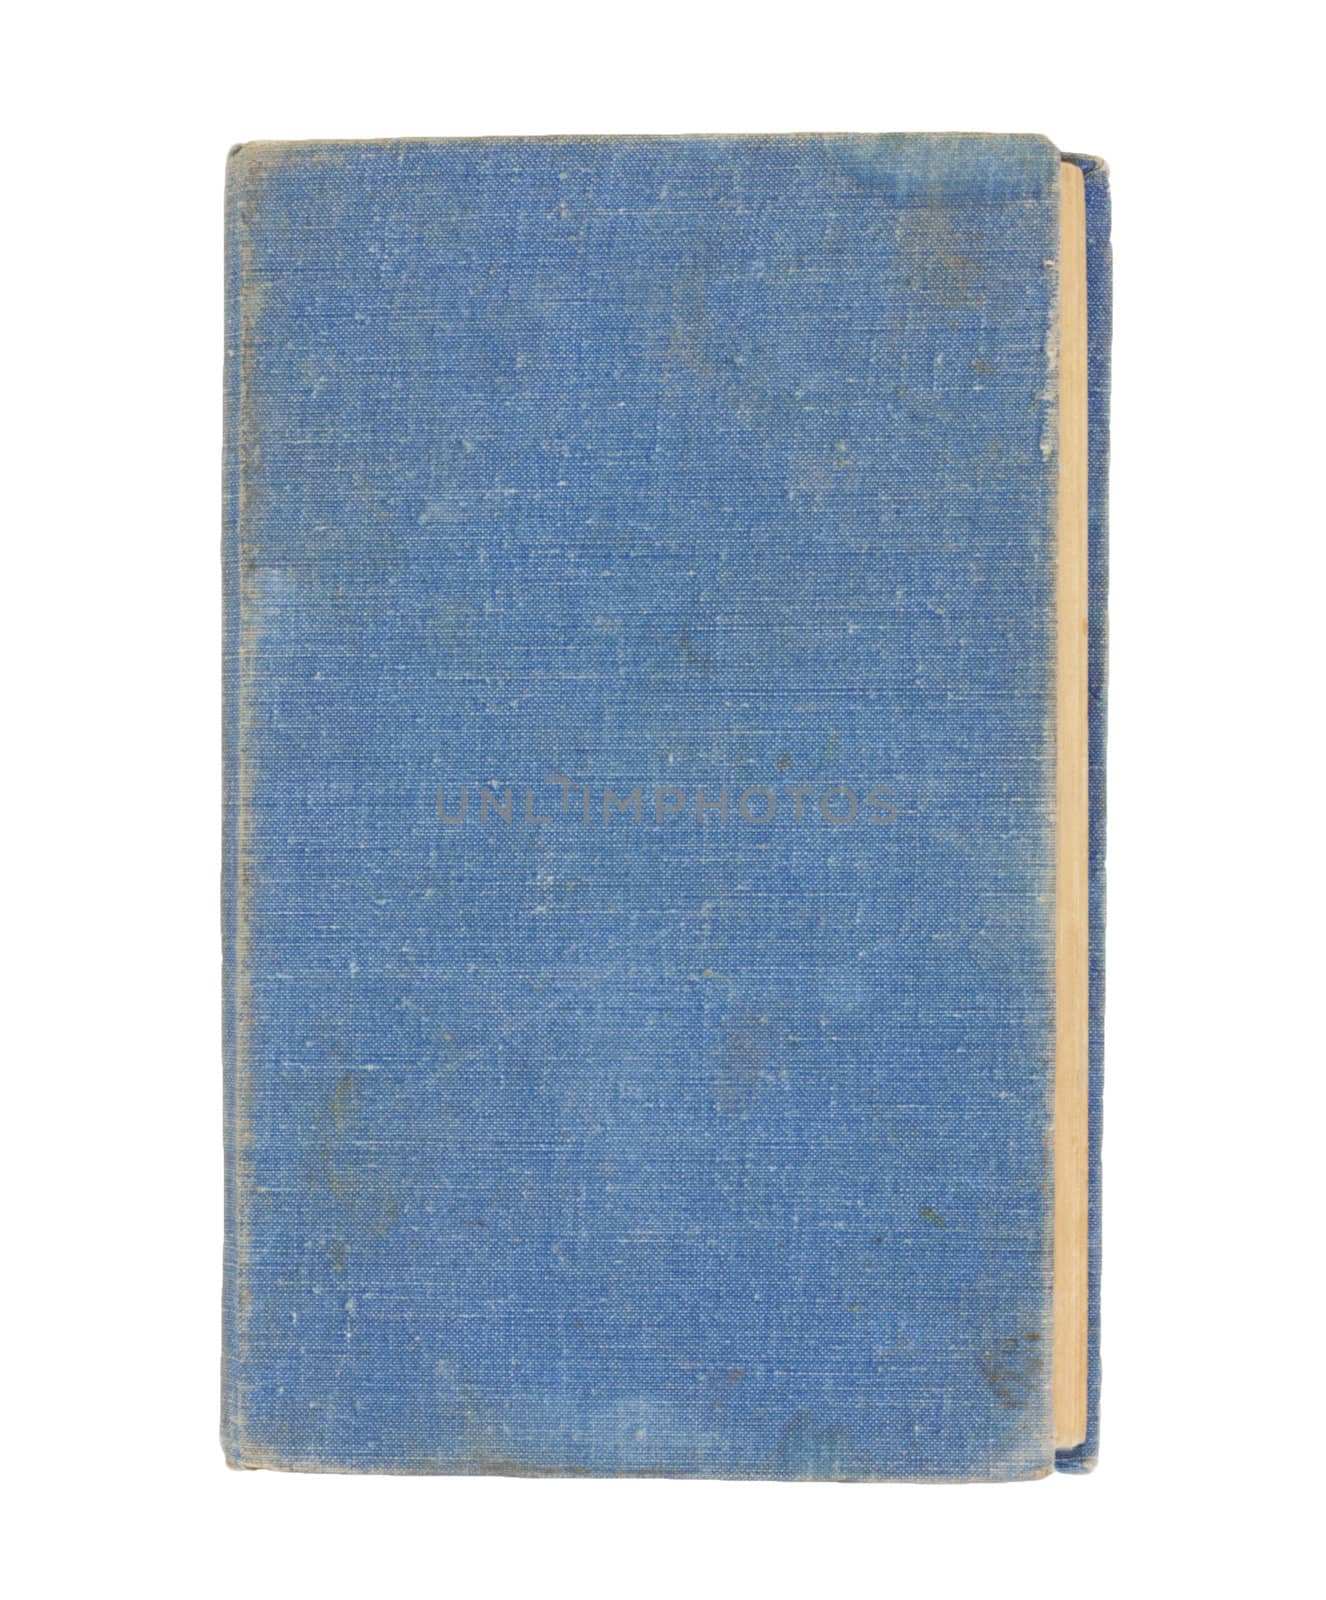 old blue book on a white background